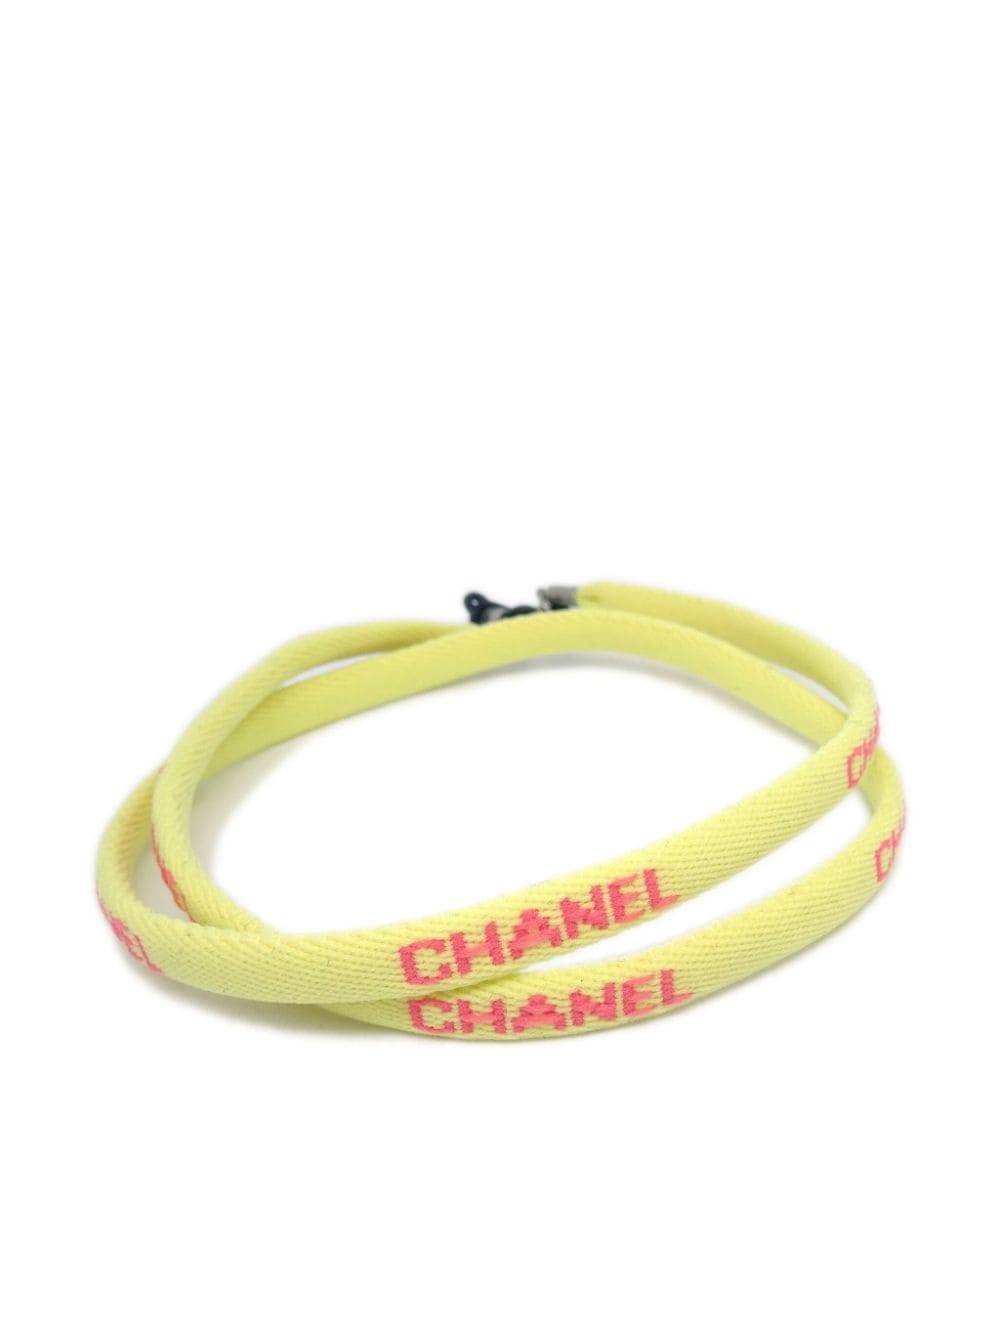 CHANEL Pre-Owned 2000 logo-embroidered sunglasses strap - Yellow